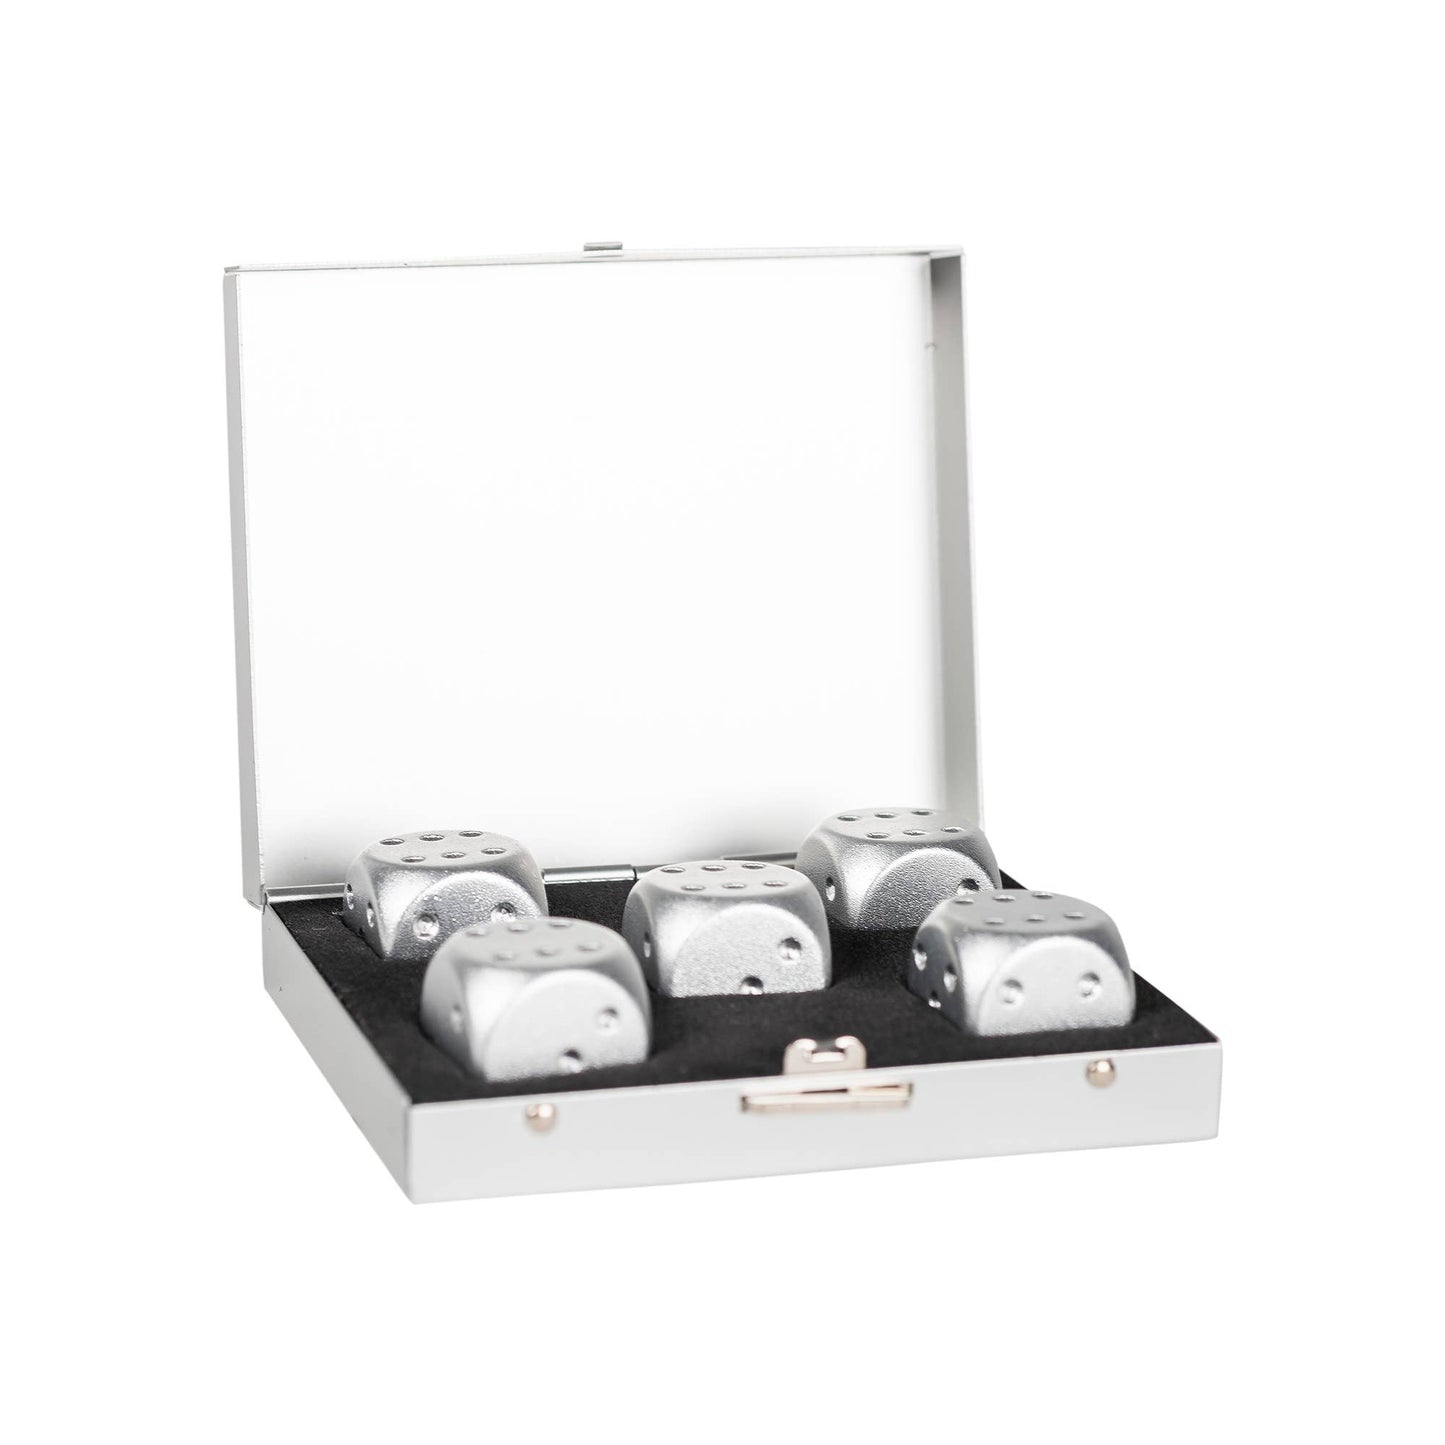 Men's Brushed Stainless Dice Set: Silver